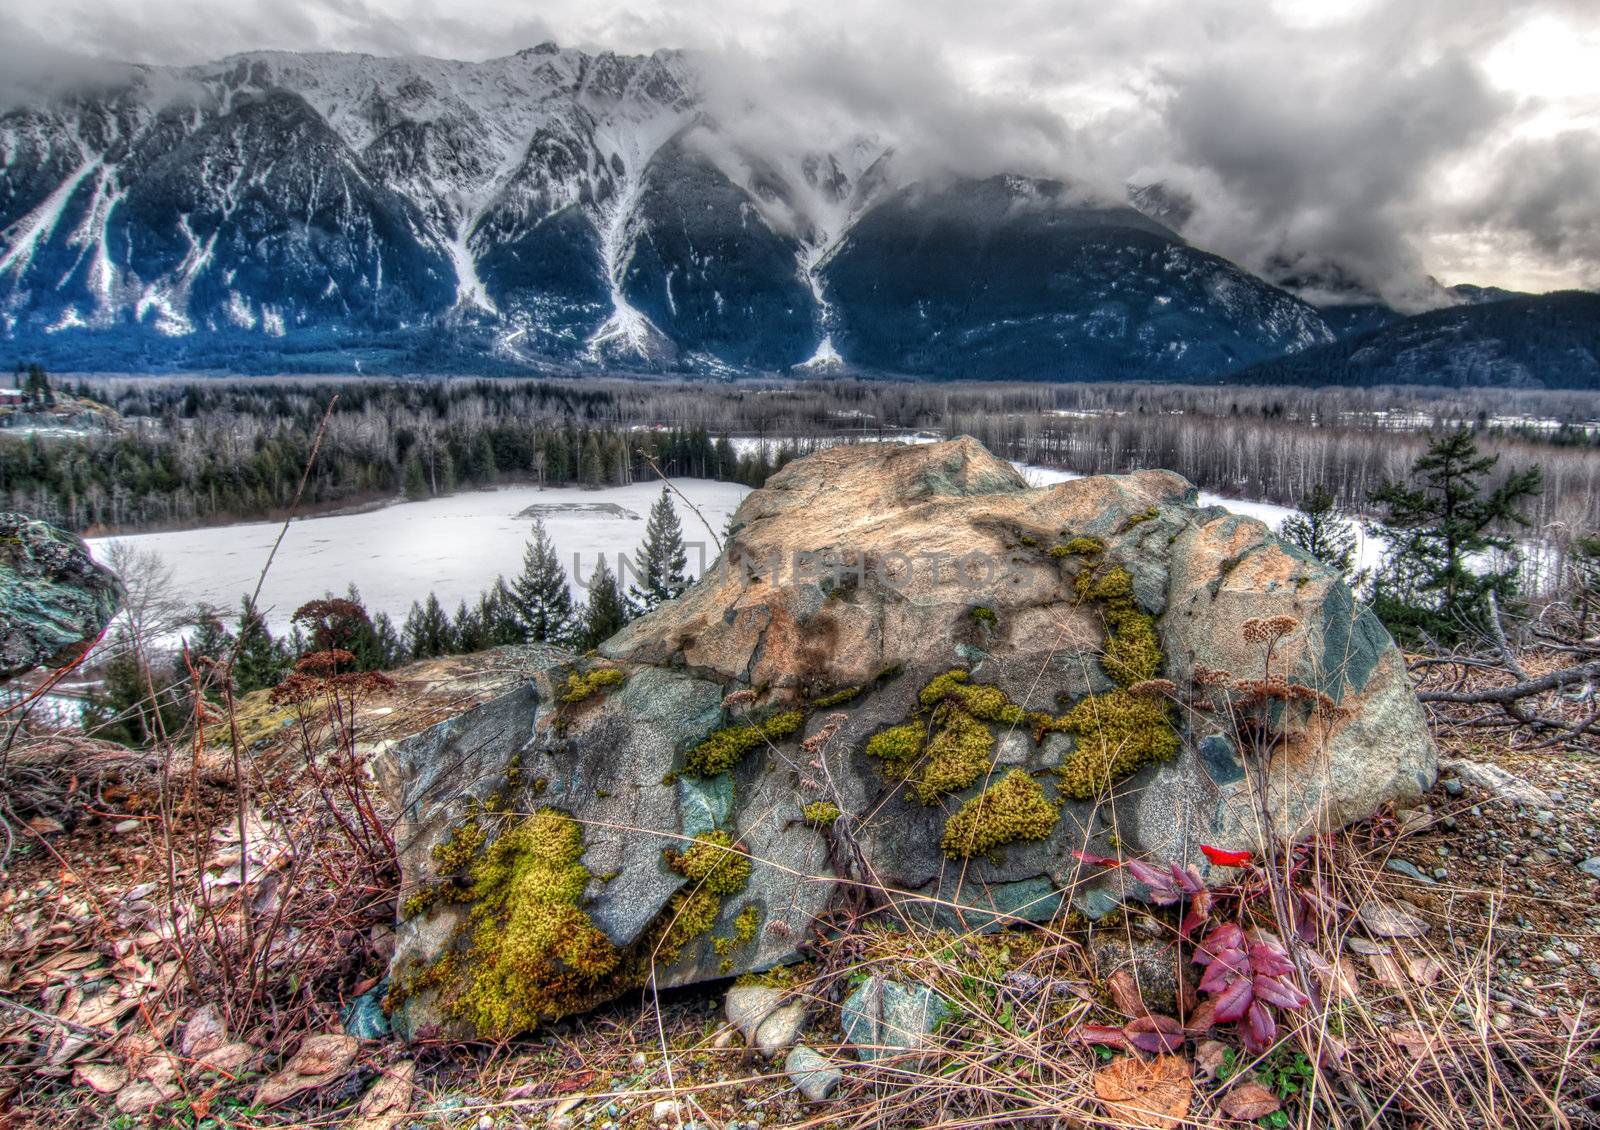 Large rock with colorful moss in front of snowy mountains